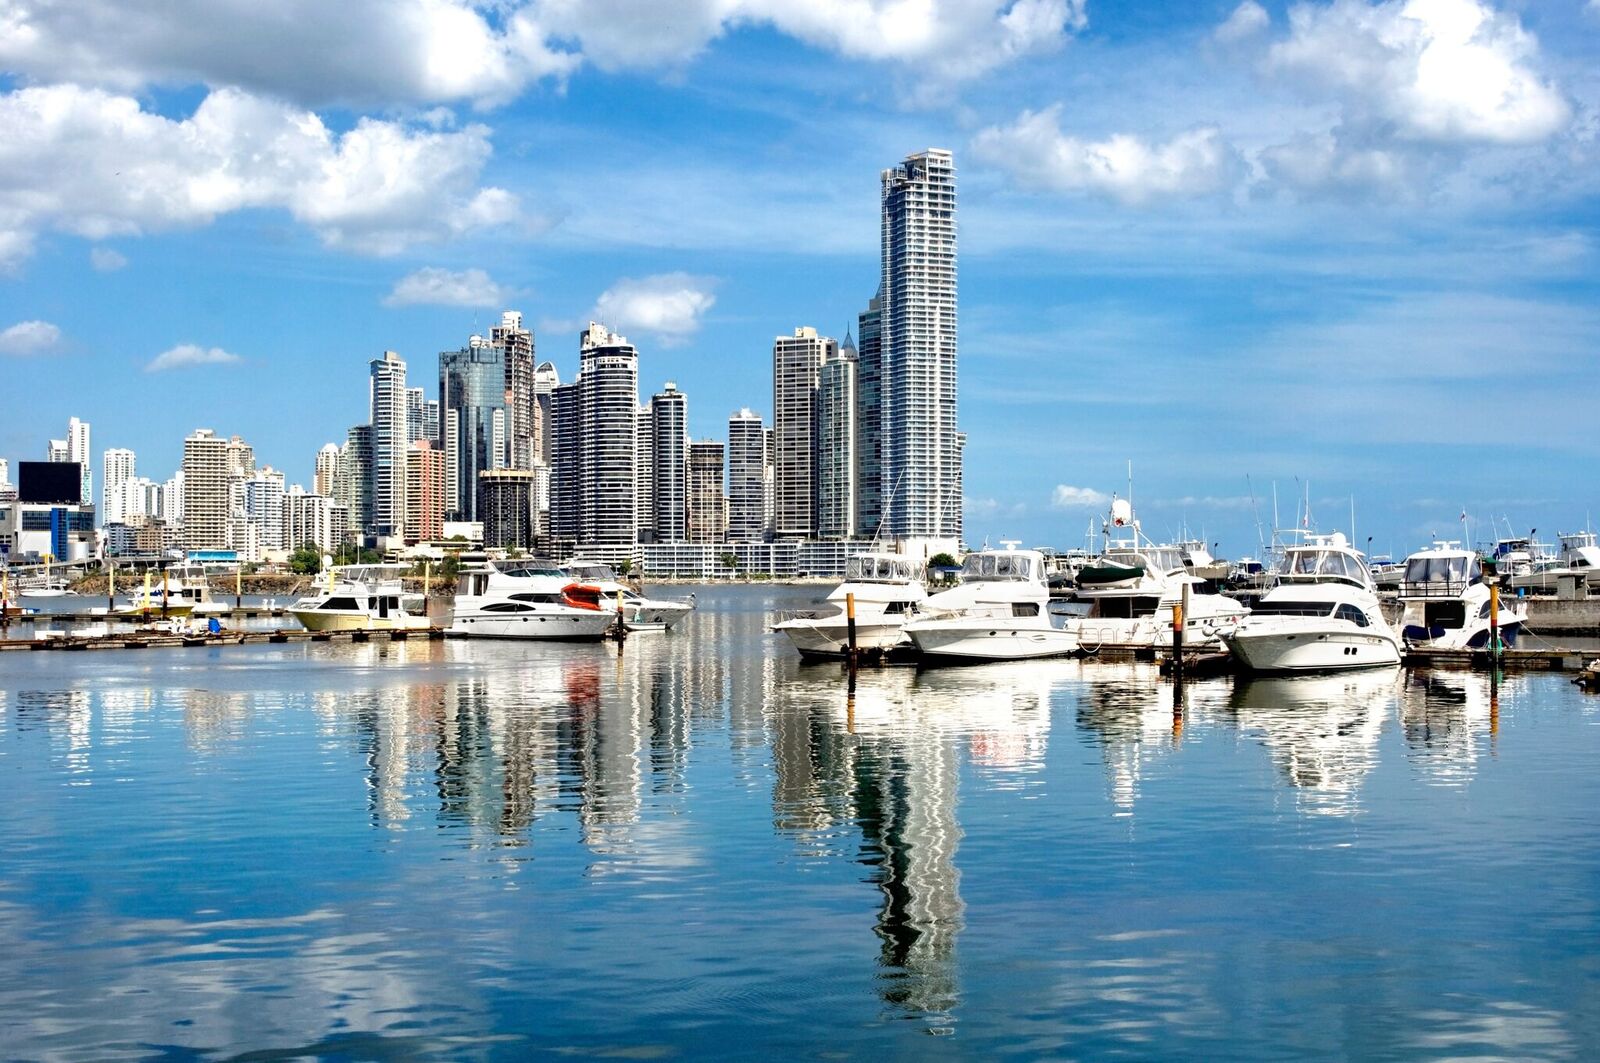 Newbies in Panama City: The Benefits of Getting Lost